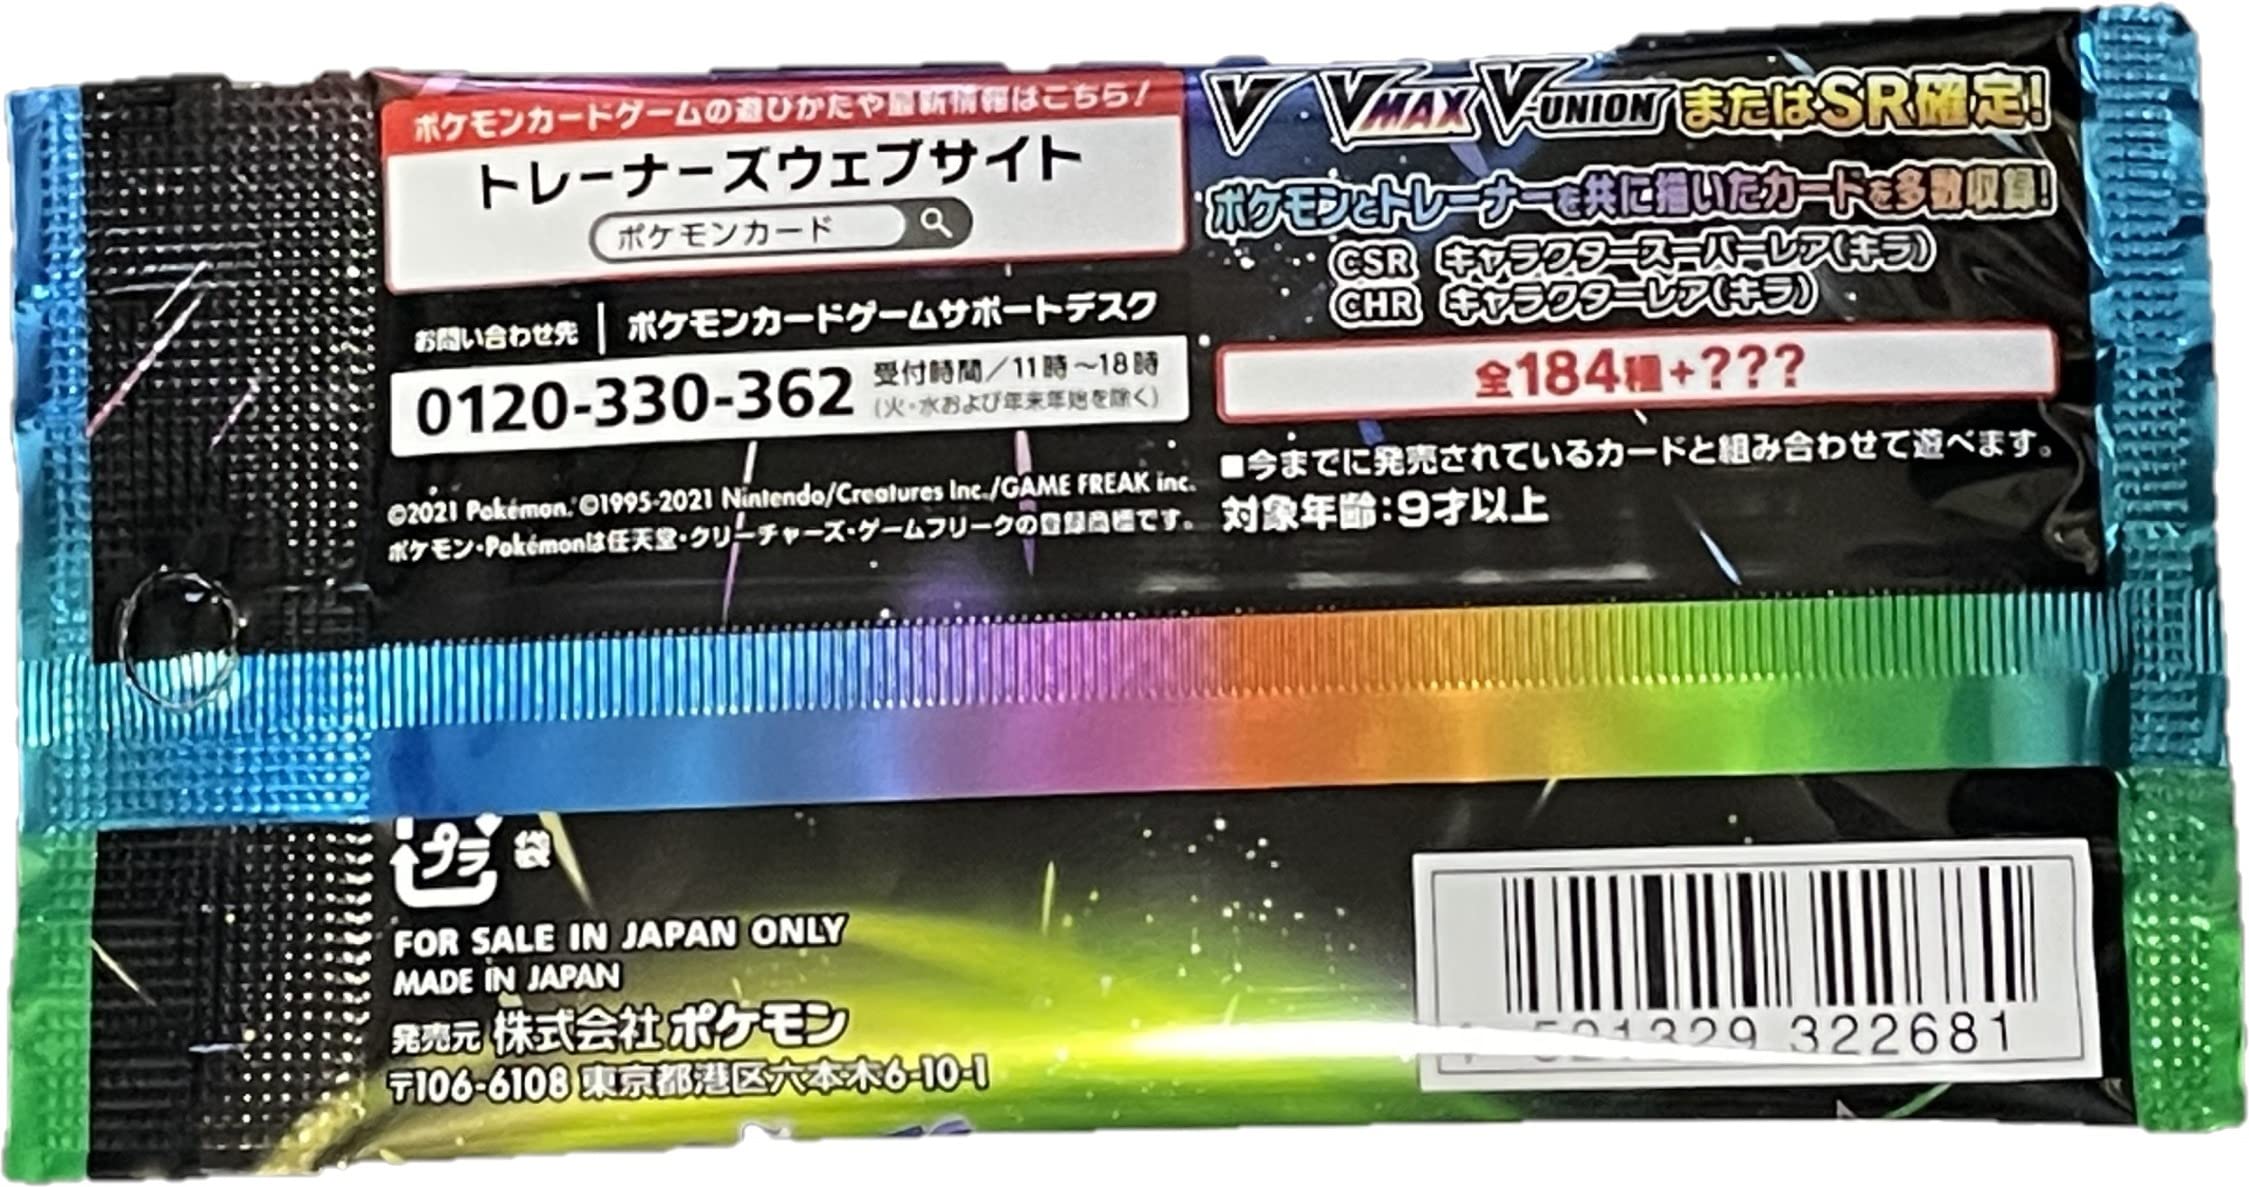 Pokemon (1pack) Card Game Sword & Shield High Class Pack VMAX Climax Japanese Ver. (5 Cards Included)